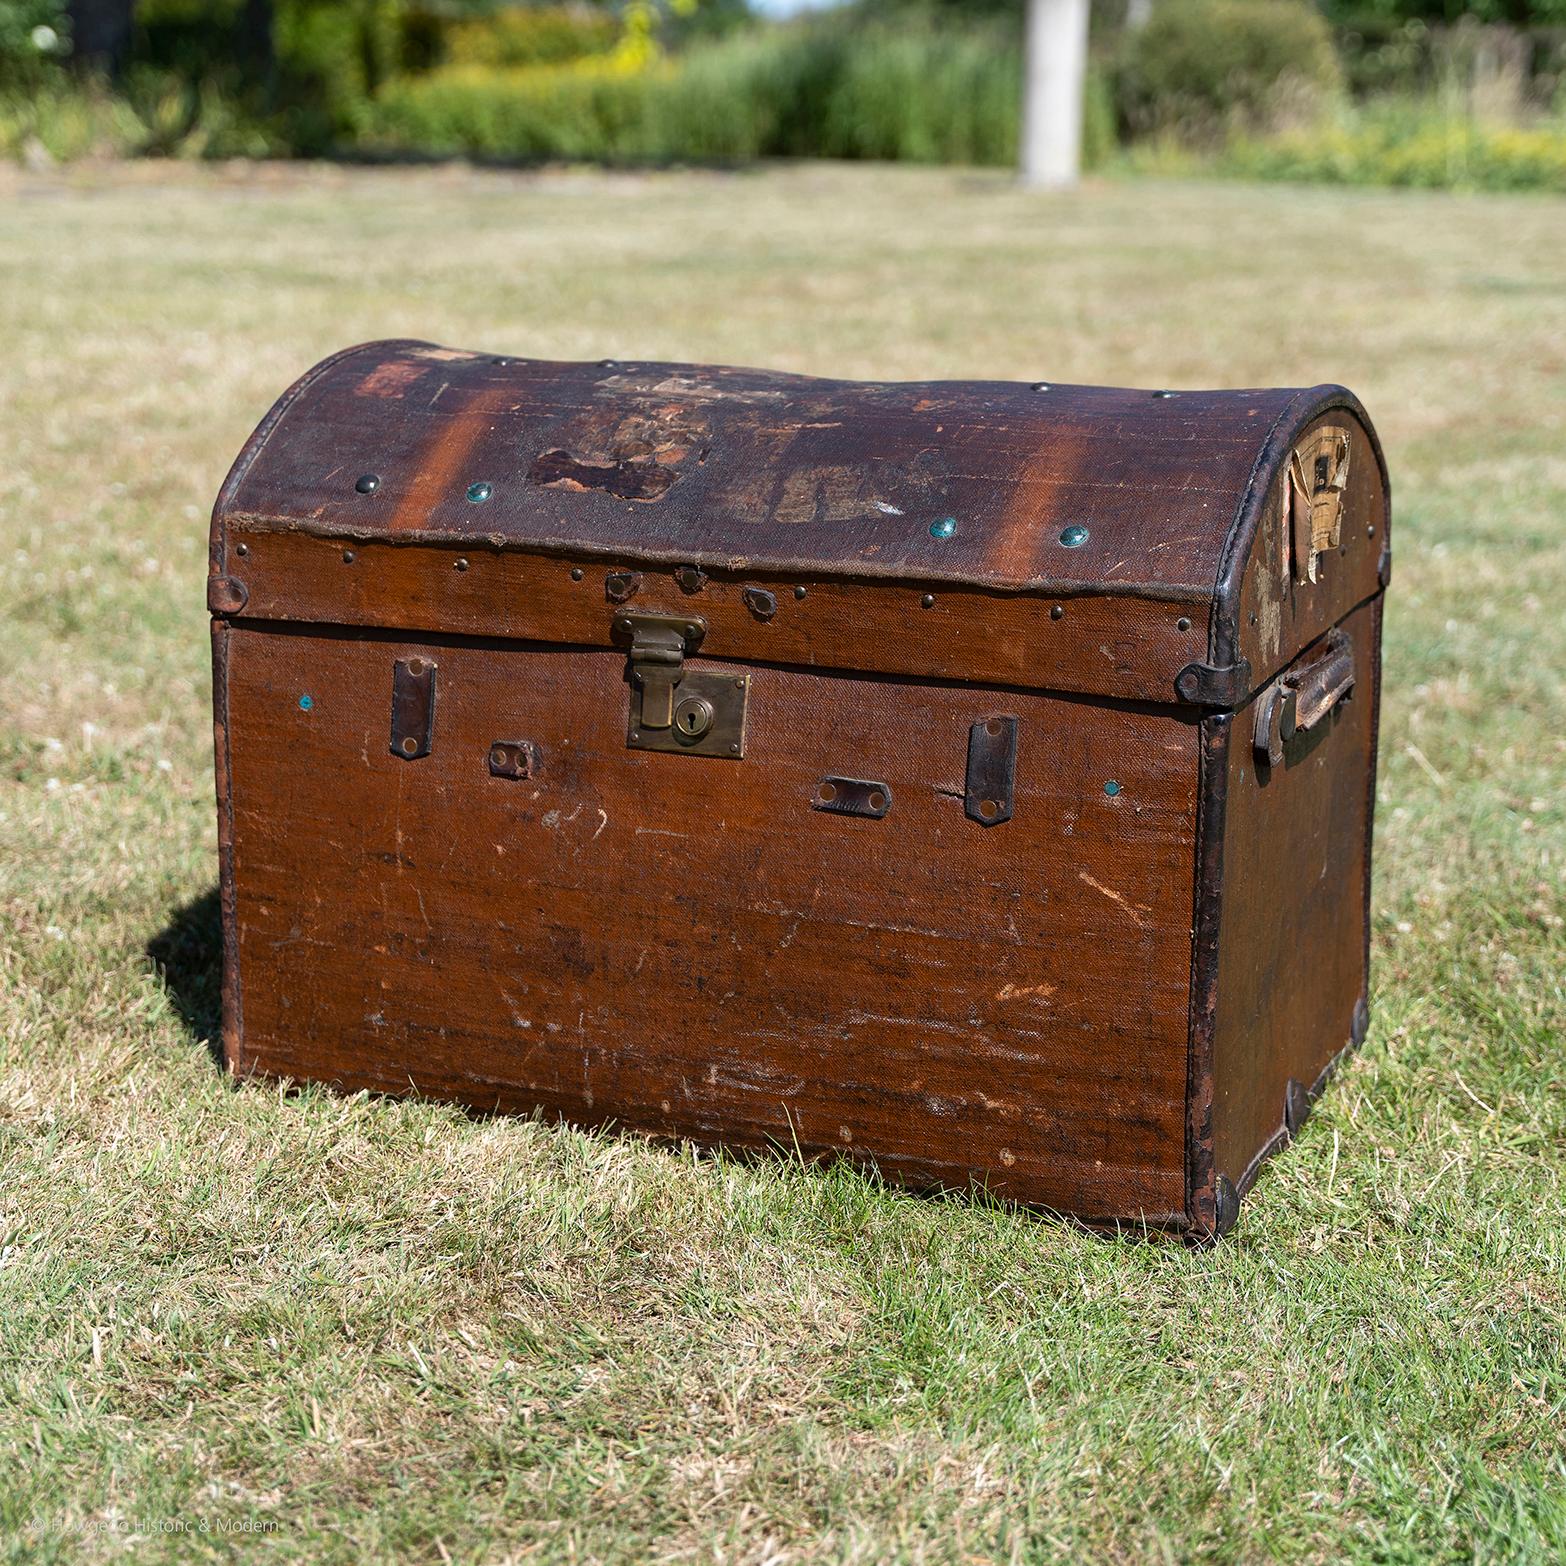 A characterful 19th century, domed, overseas, travelling, steamer, trunk in canvass with leather trim, handles and brass hardware with lock. No key. The exposed straps removed. Bearing an old Southern Railway paper label no 2812 from Dover Priory